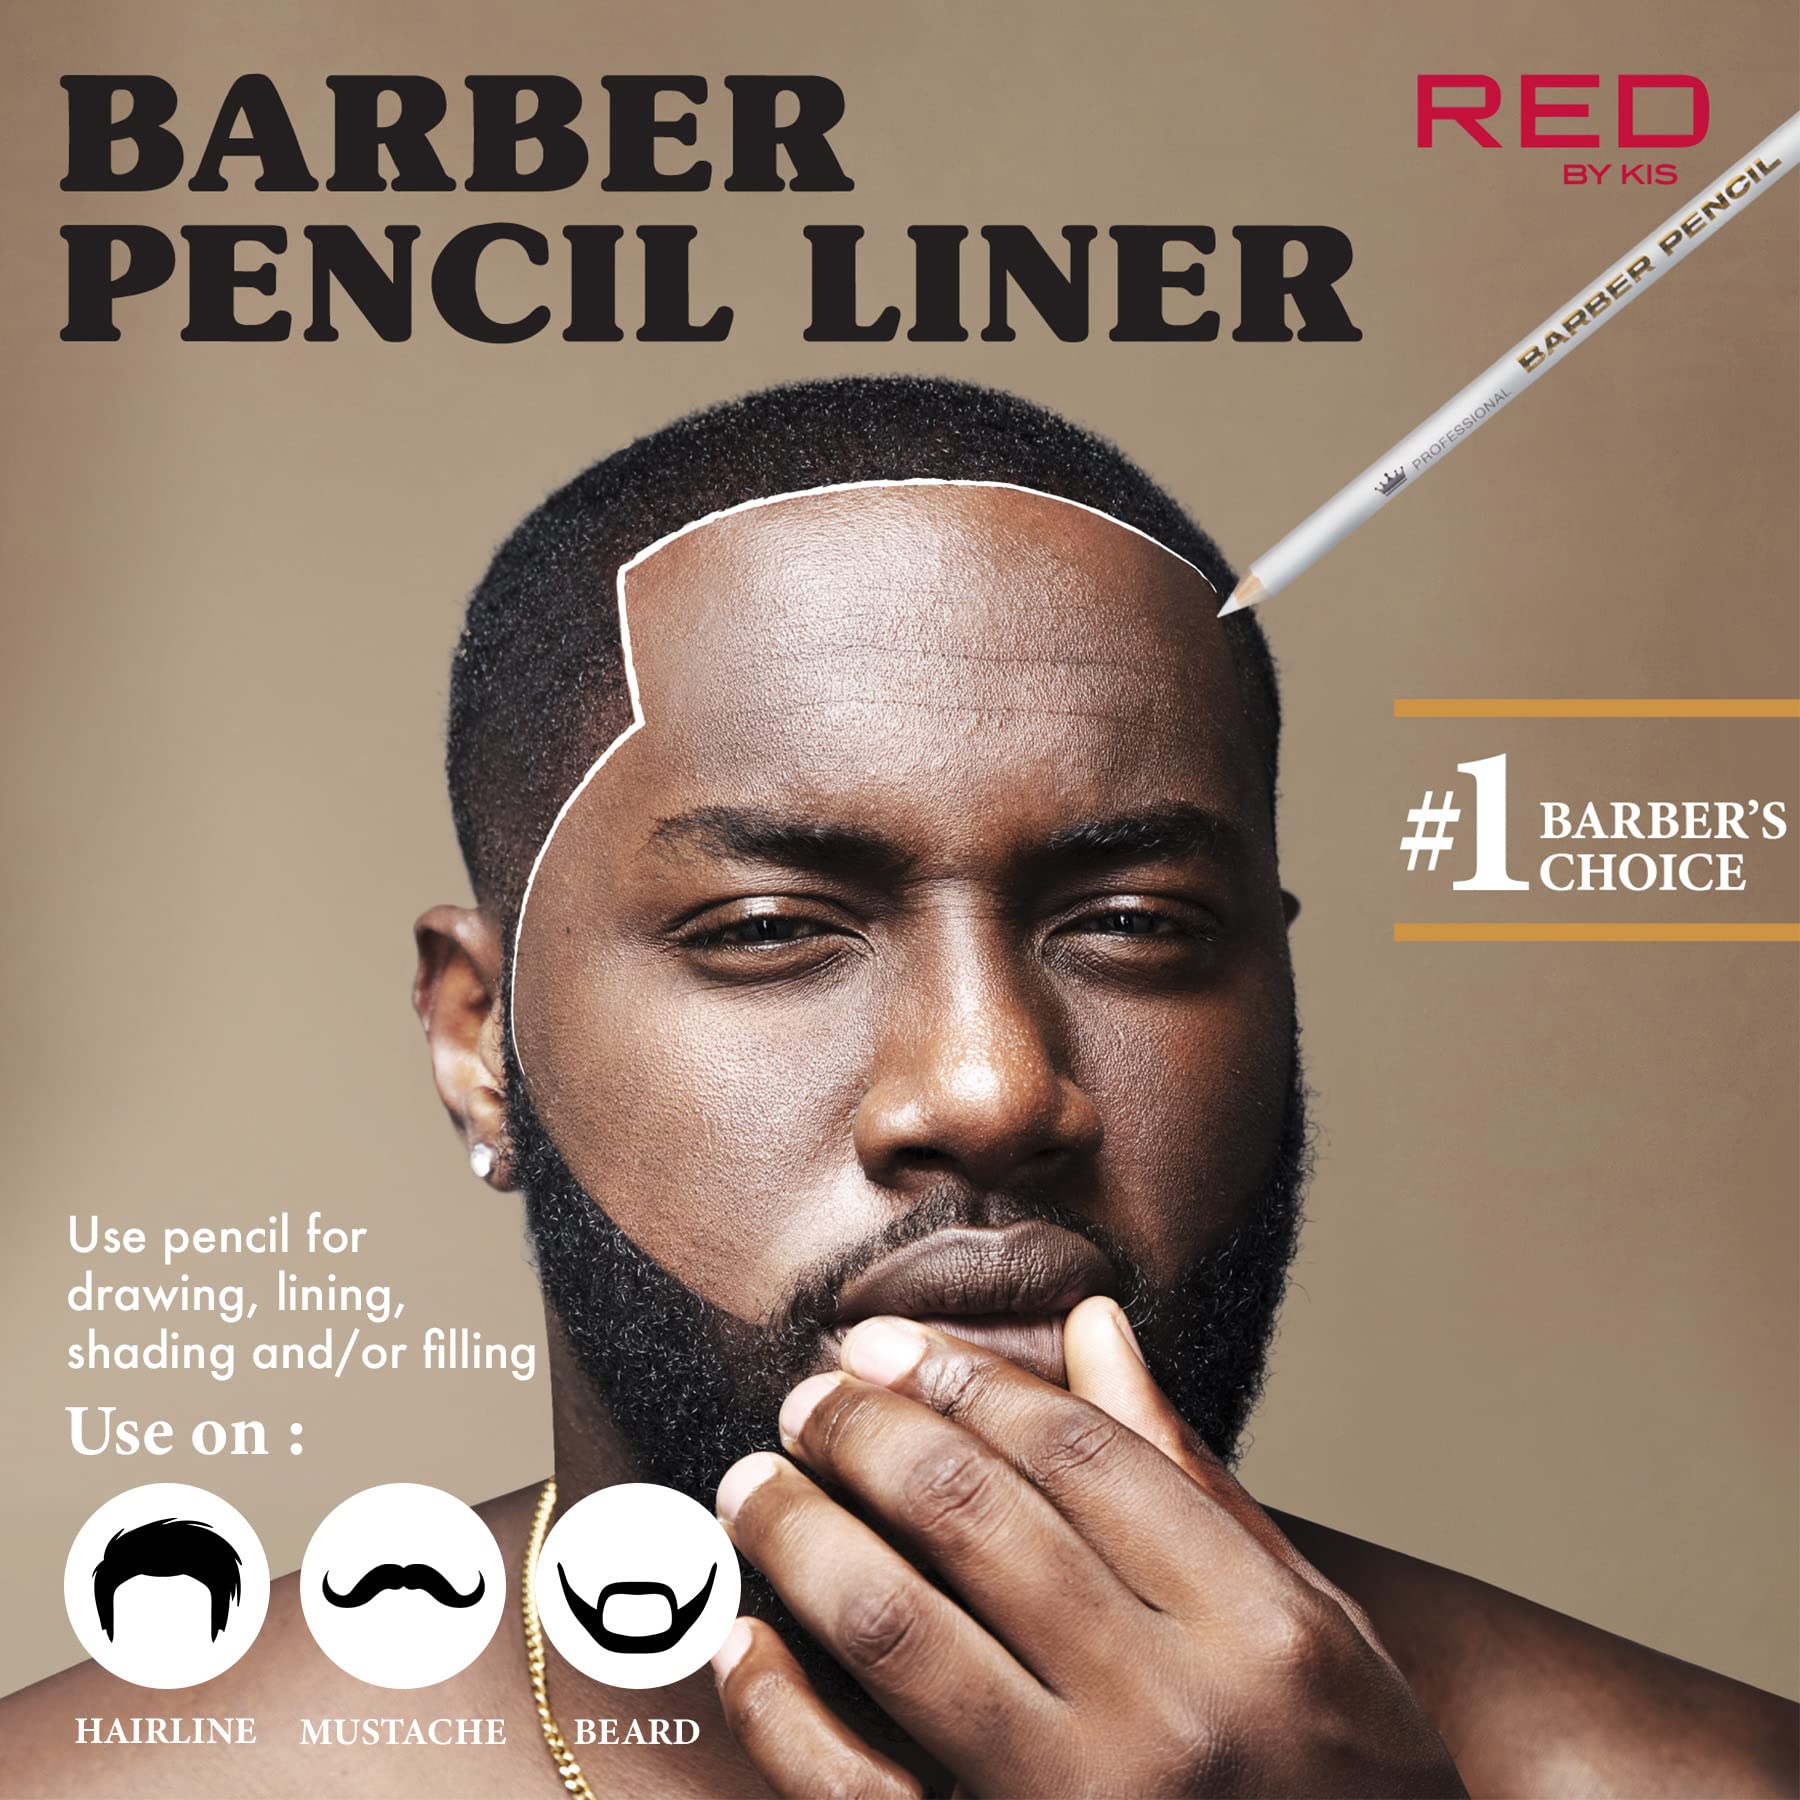 Red by Kiss 3PCS Barber Pencil with Built-in Sharpener Edge Hairline Razor Trace Pencils Beard Guide Beard and Hairline Outliner Pencils, Beard Shaping Pencils for Men (White)